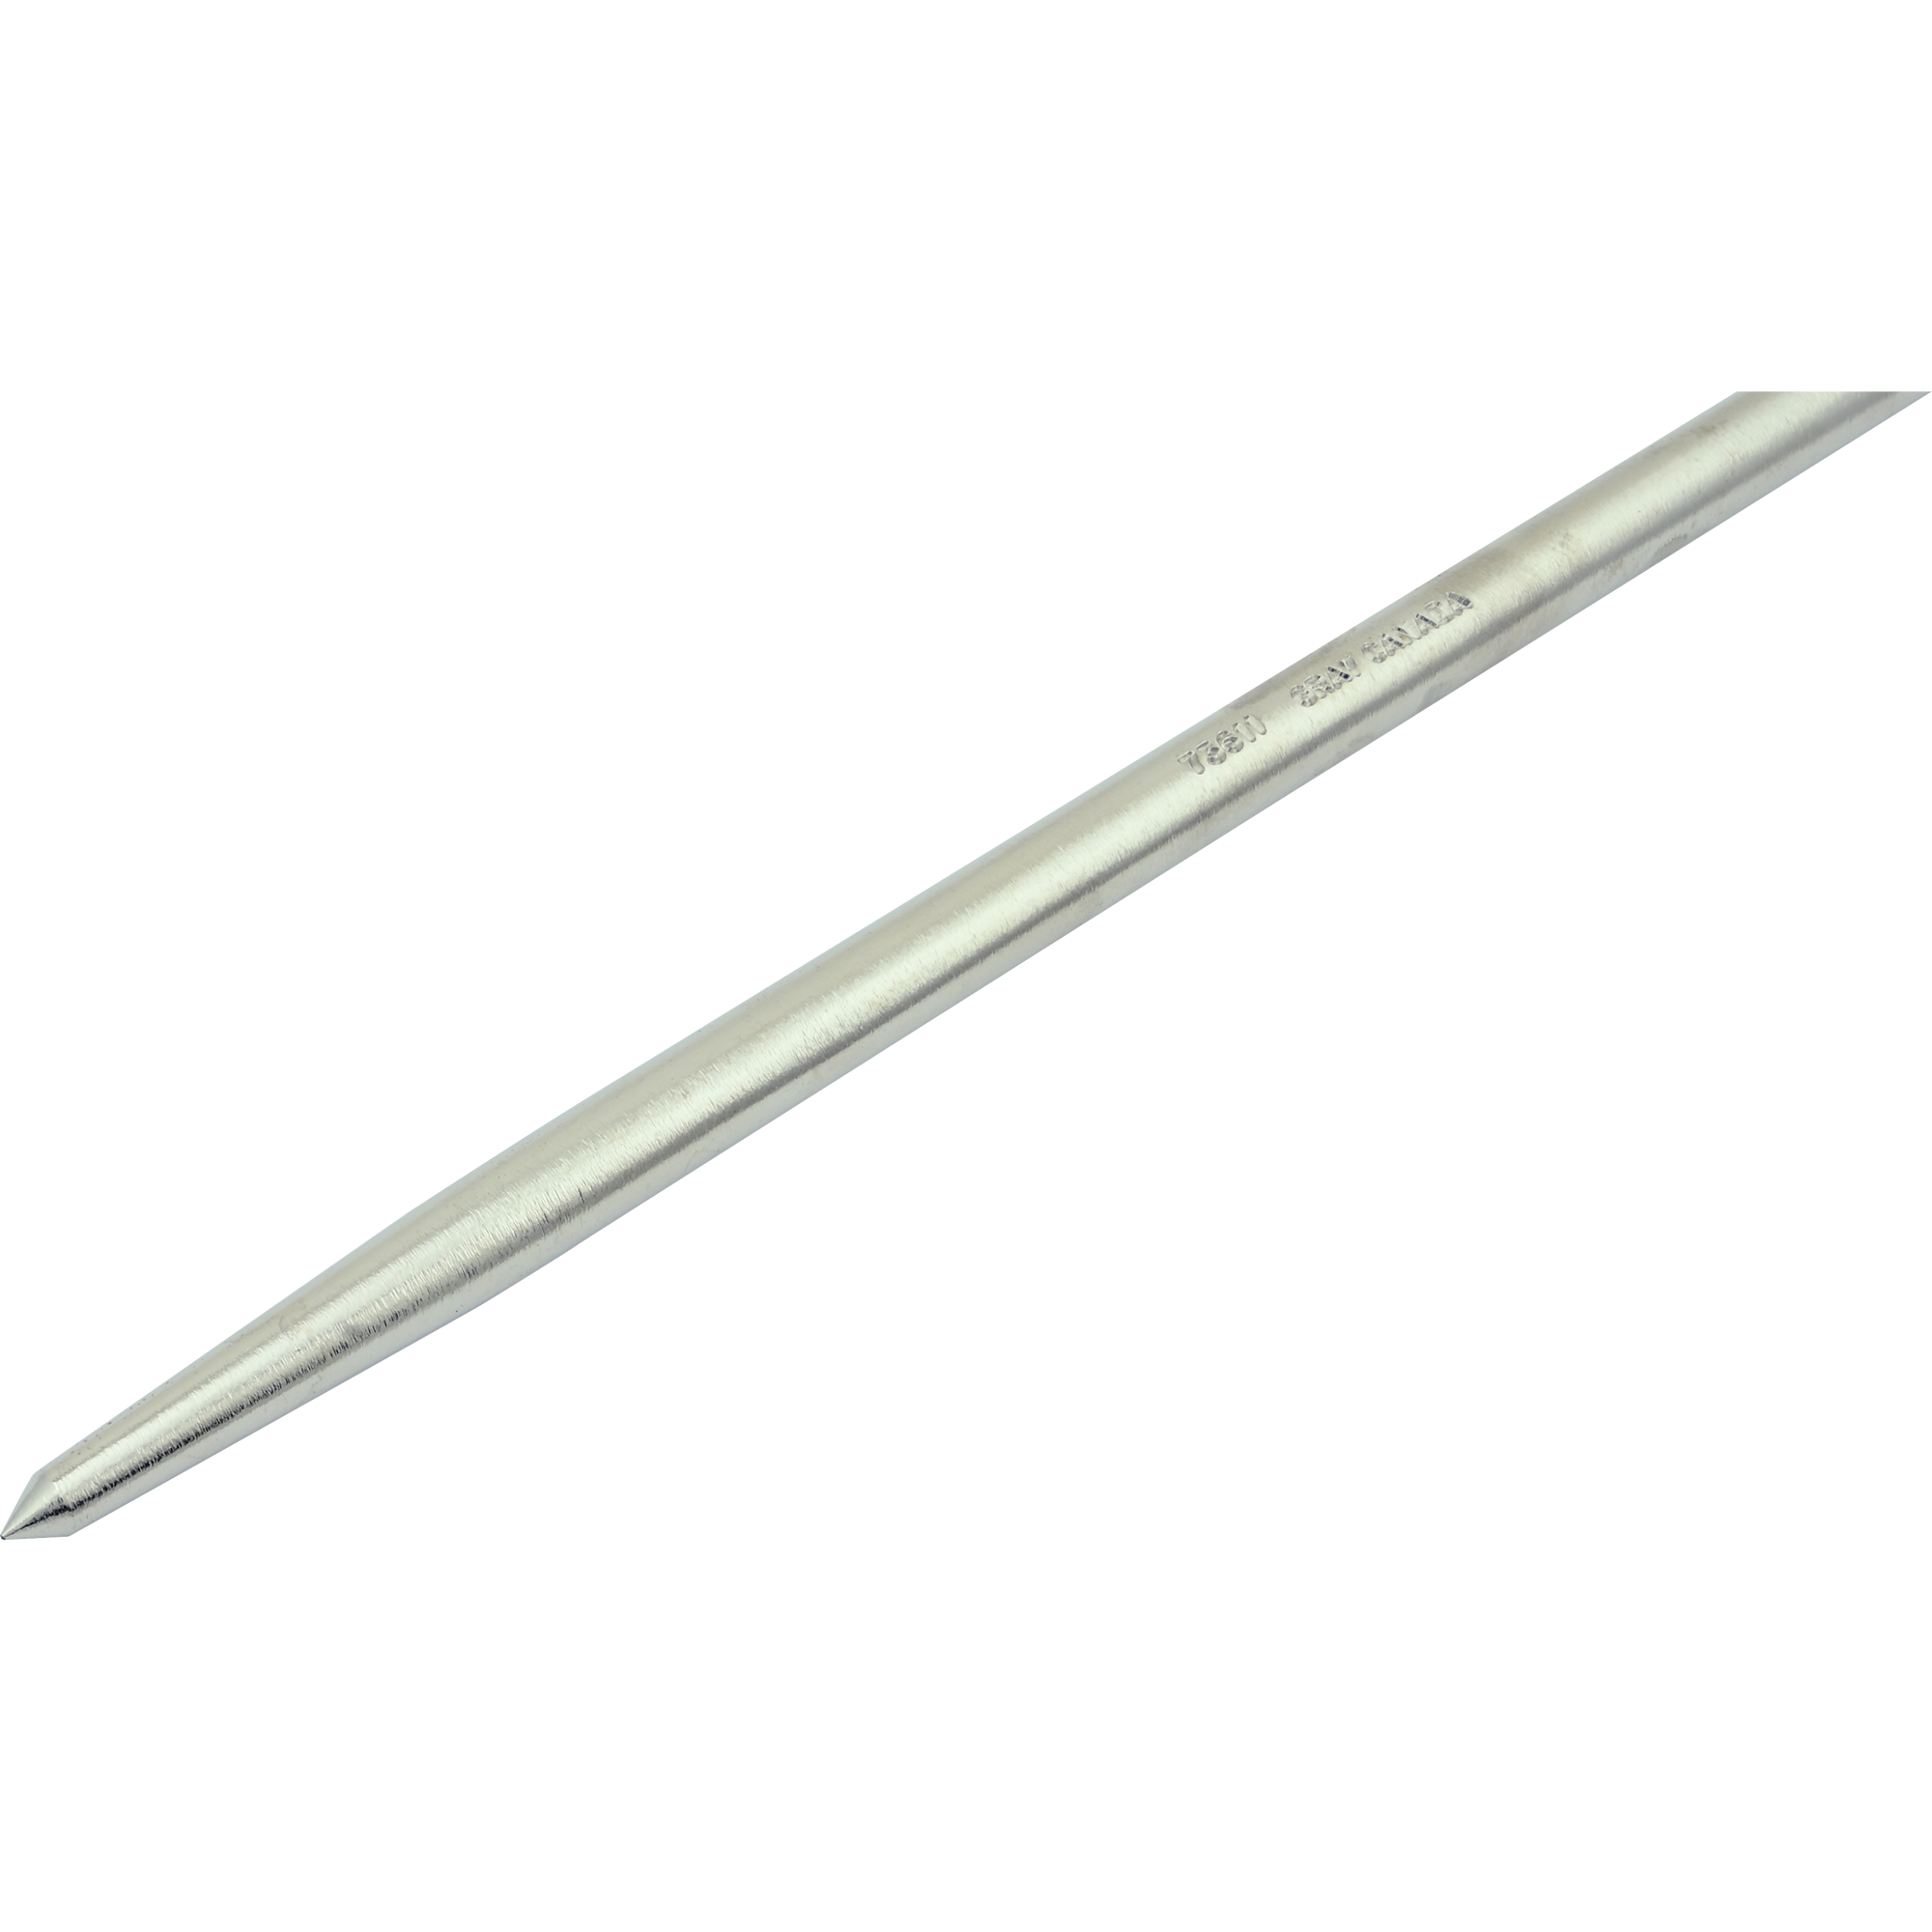 Rolling Head Pry Bars, Round Shank with Polished Point, Nickel Plate Finish